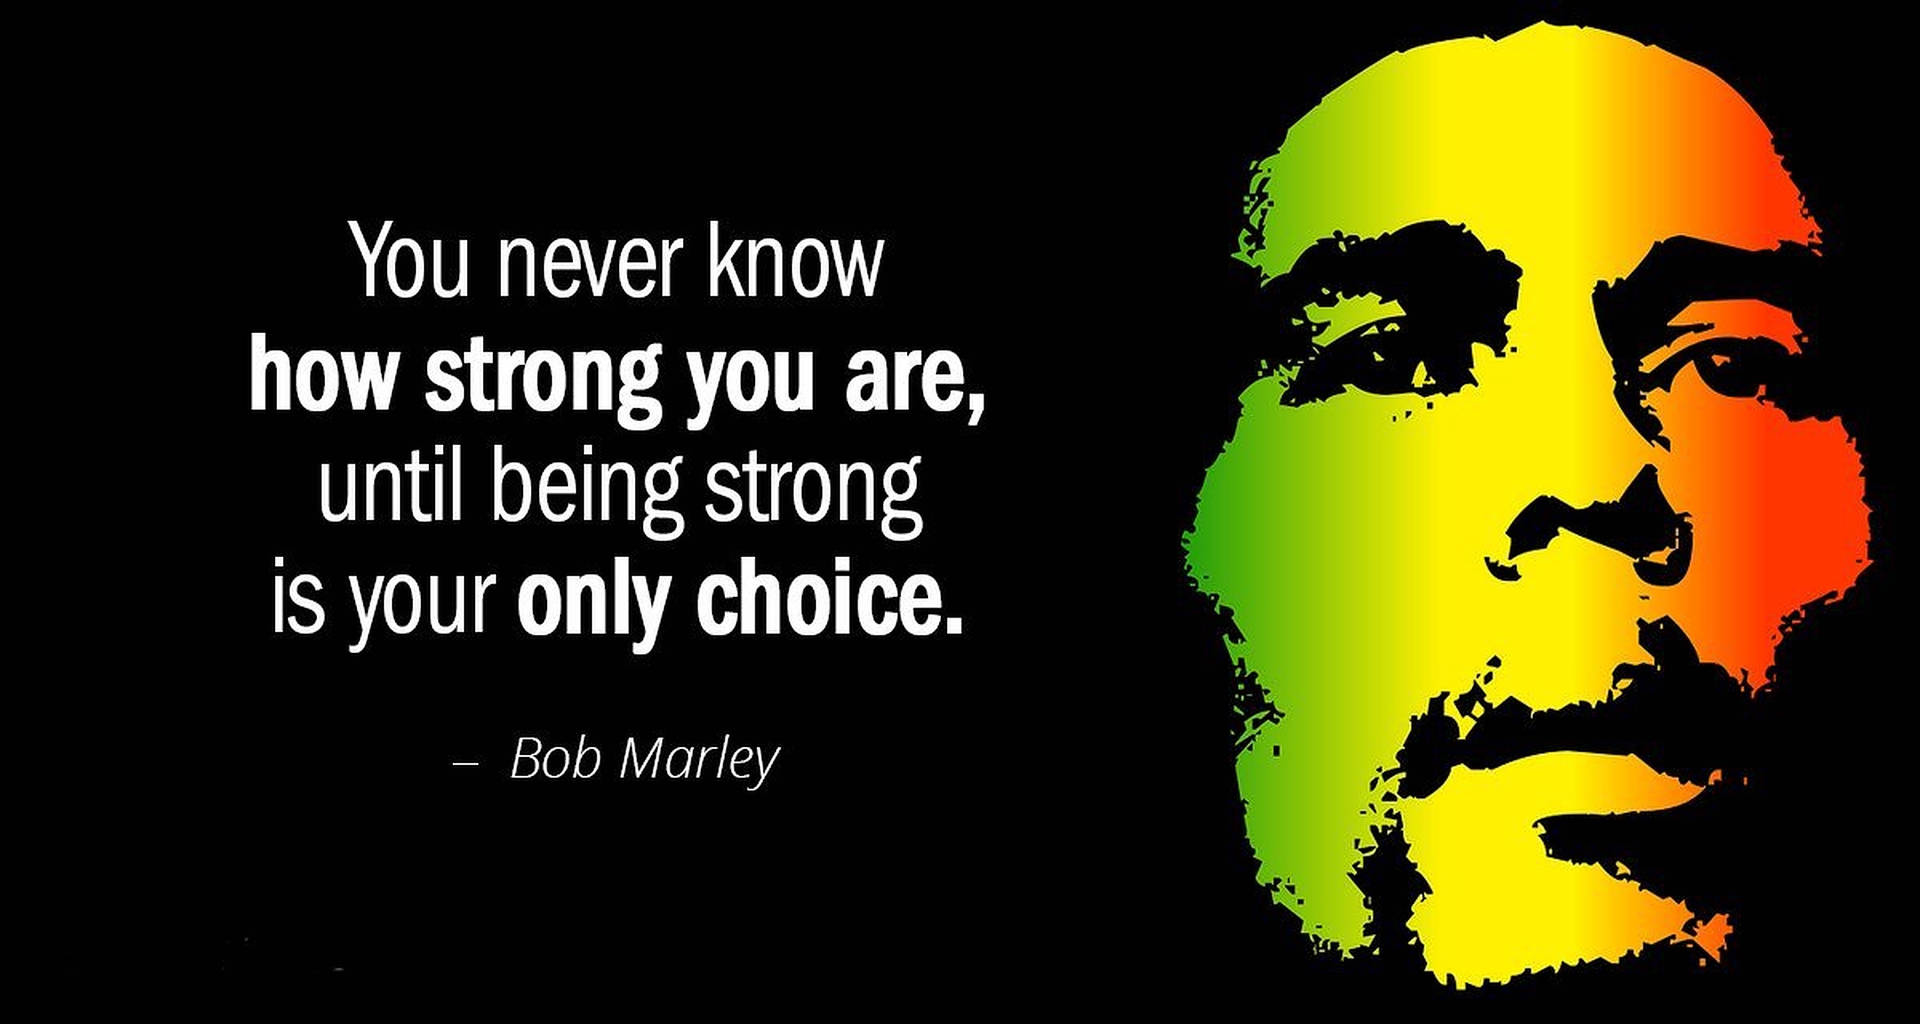 Bob Marley Quotes About Strength Background